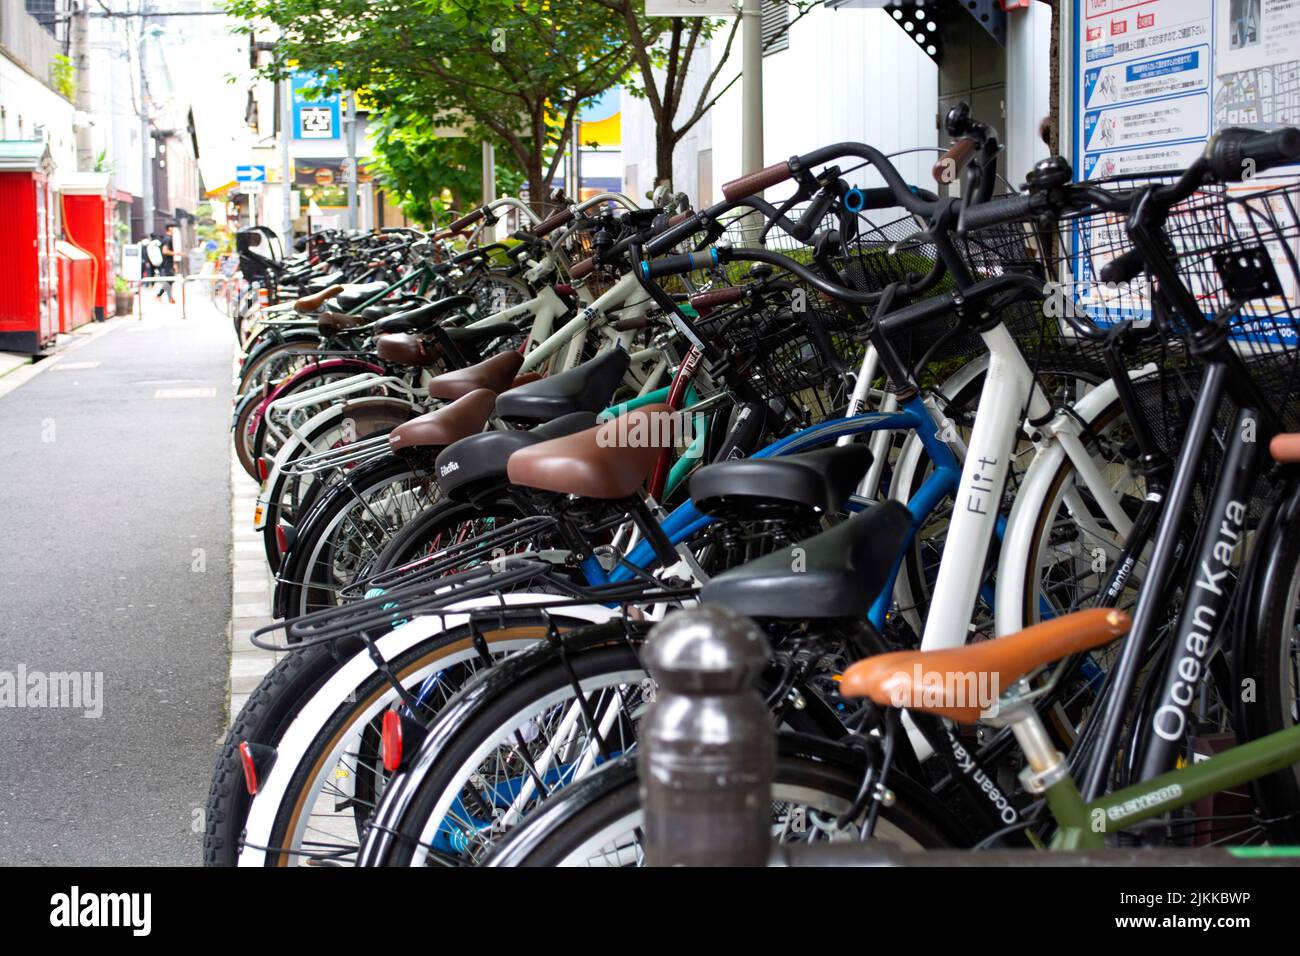 Bikes lined up in wrack on side street in Japan Stock Photo